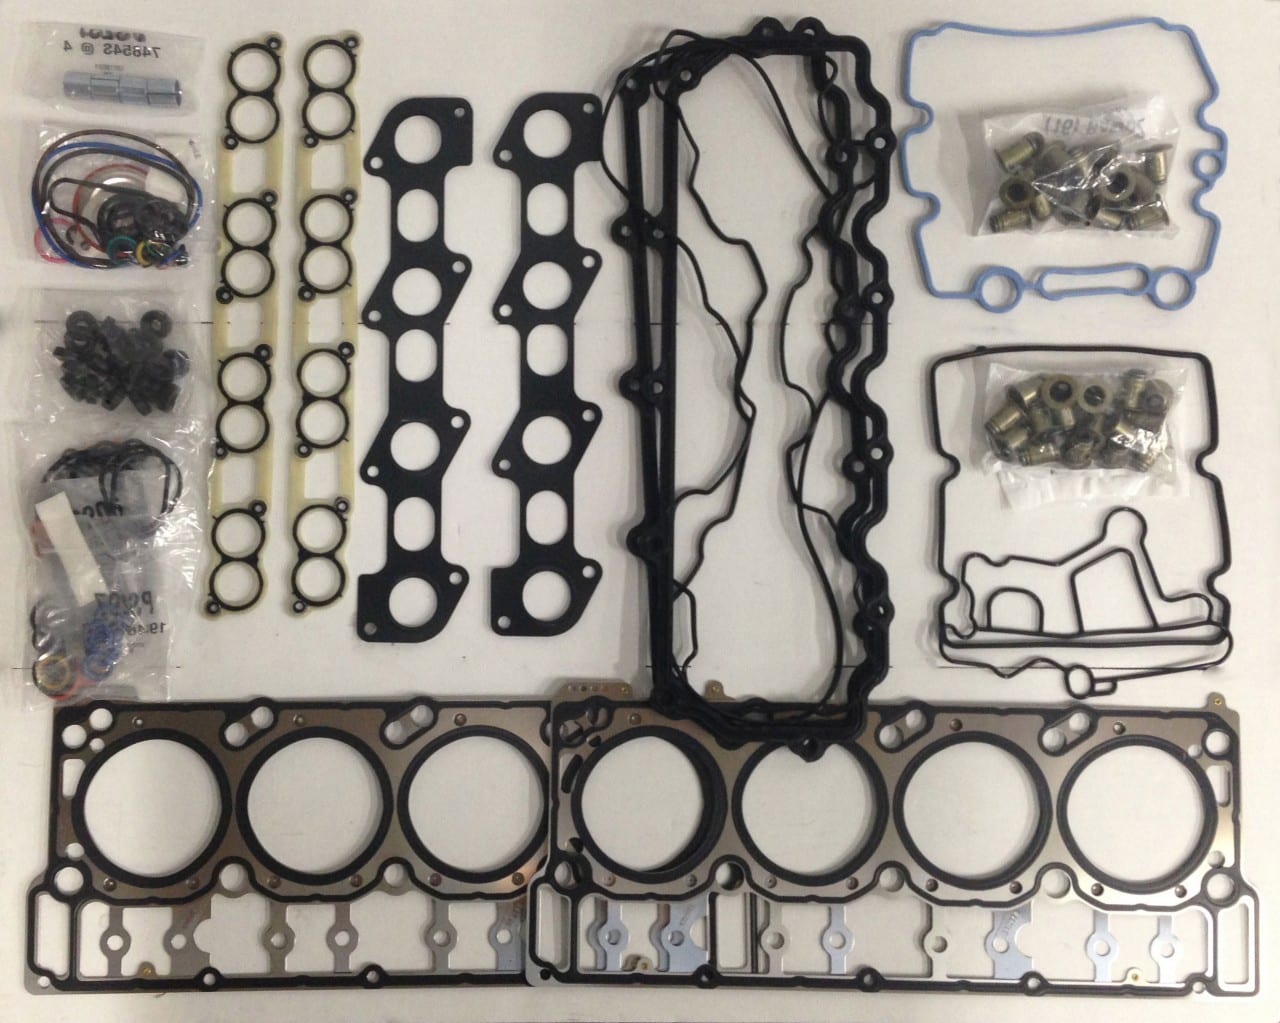 2003-2007 6.0L Ford Powerstroke 18mm Head Gasket Kit 6.0 Powerstroke Head Gasket Replacement With Cab On